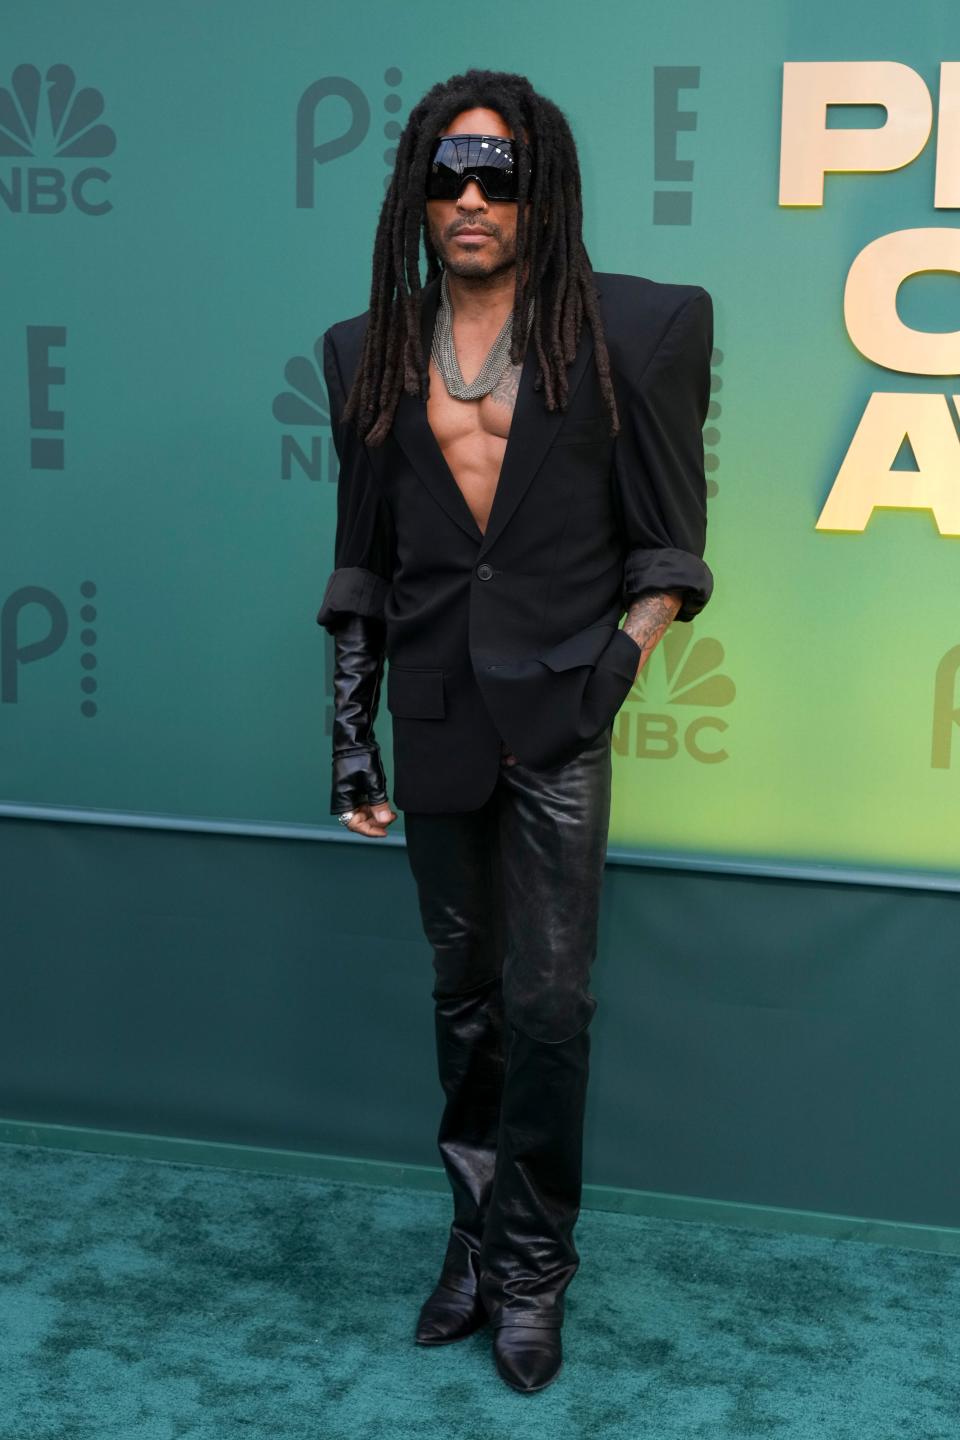 Lenny Kravitz, while accepting the music icon award at the People's Choice Awards, gives a powerful speech: "Never follow the trends."